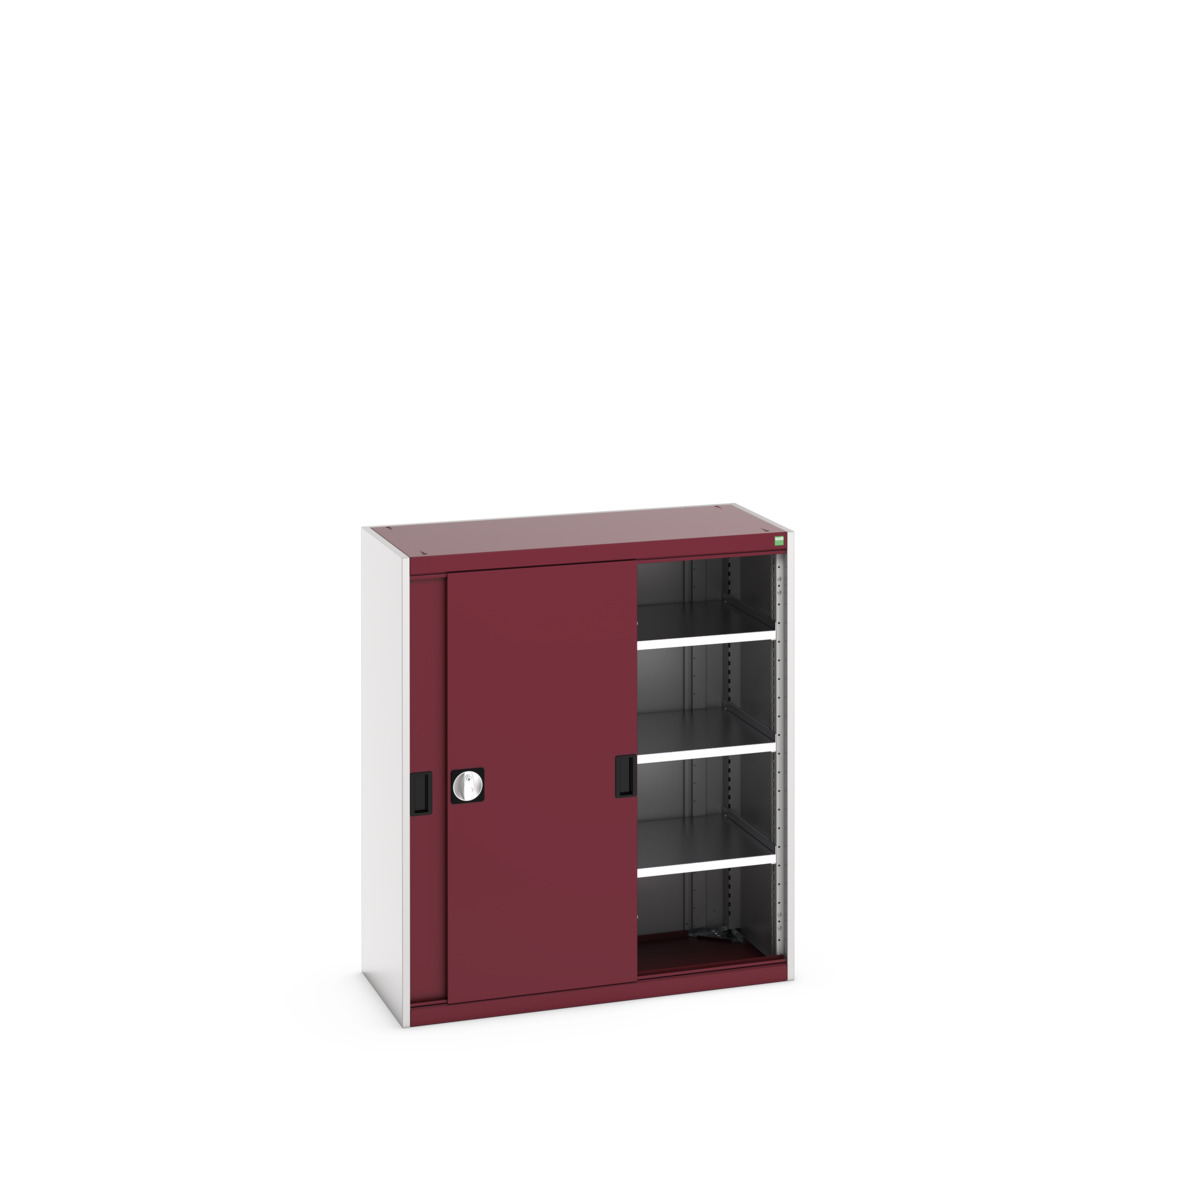 40013069.24V - Armoire Cubio SMS-10512-1.1